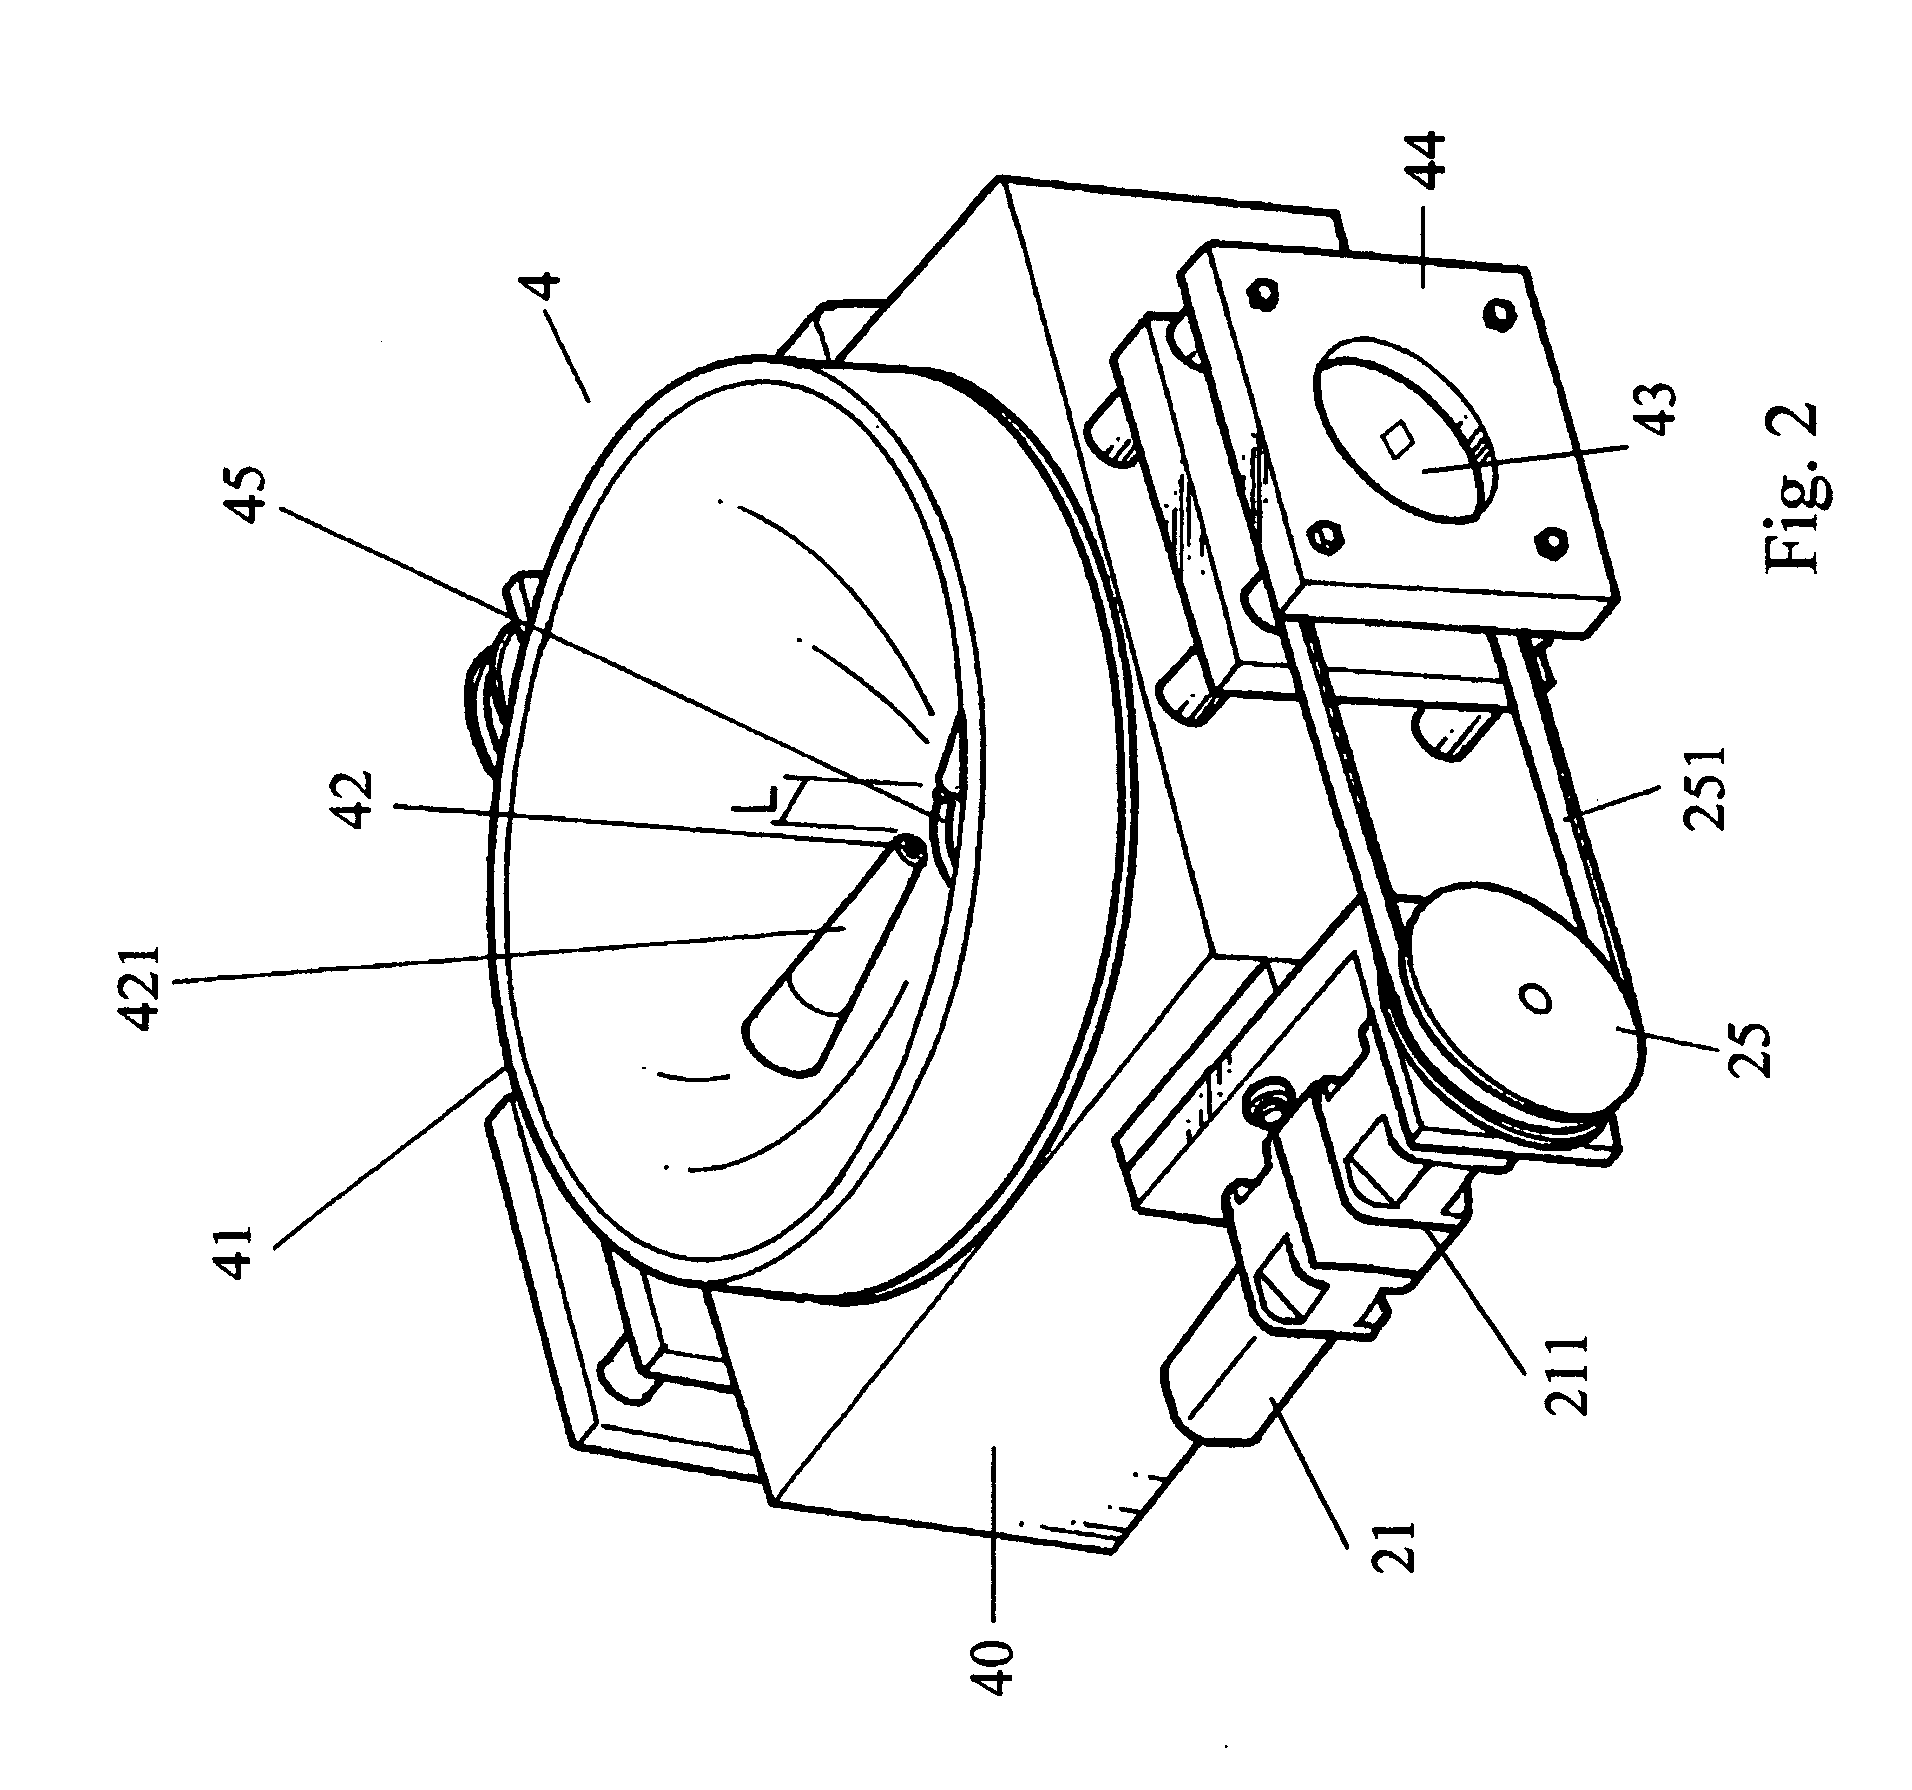 Electrohydraulic shock wave-generating system with automatic gap adjustment